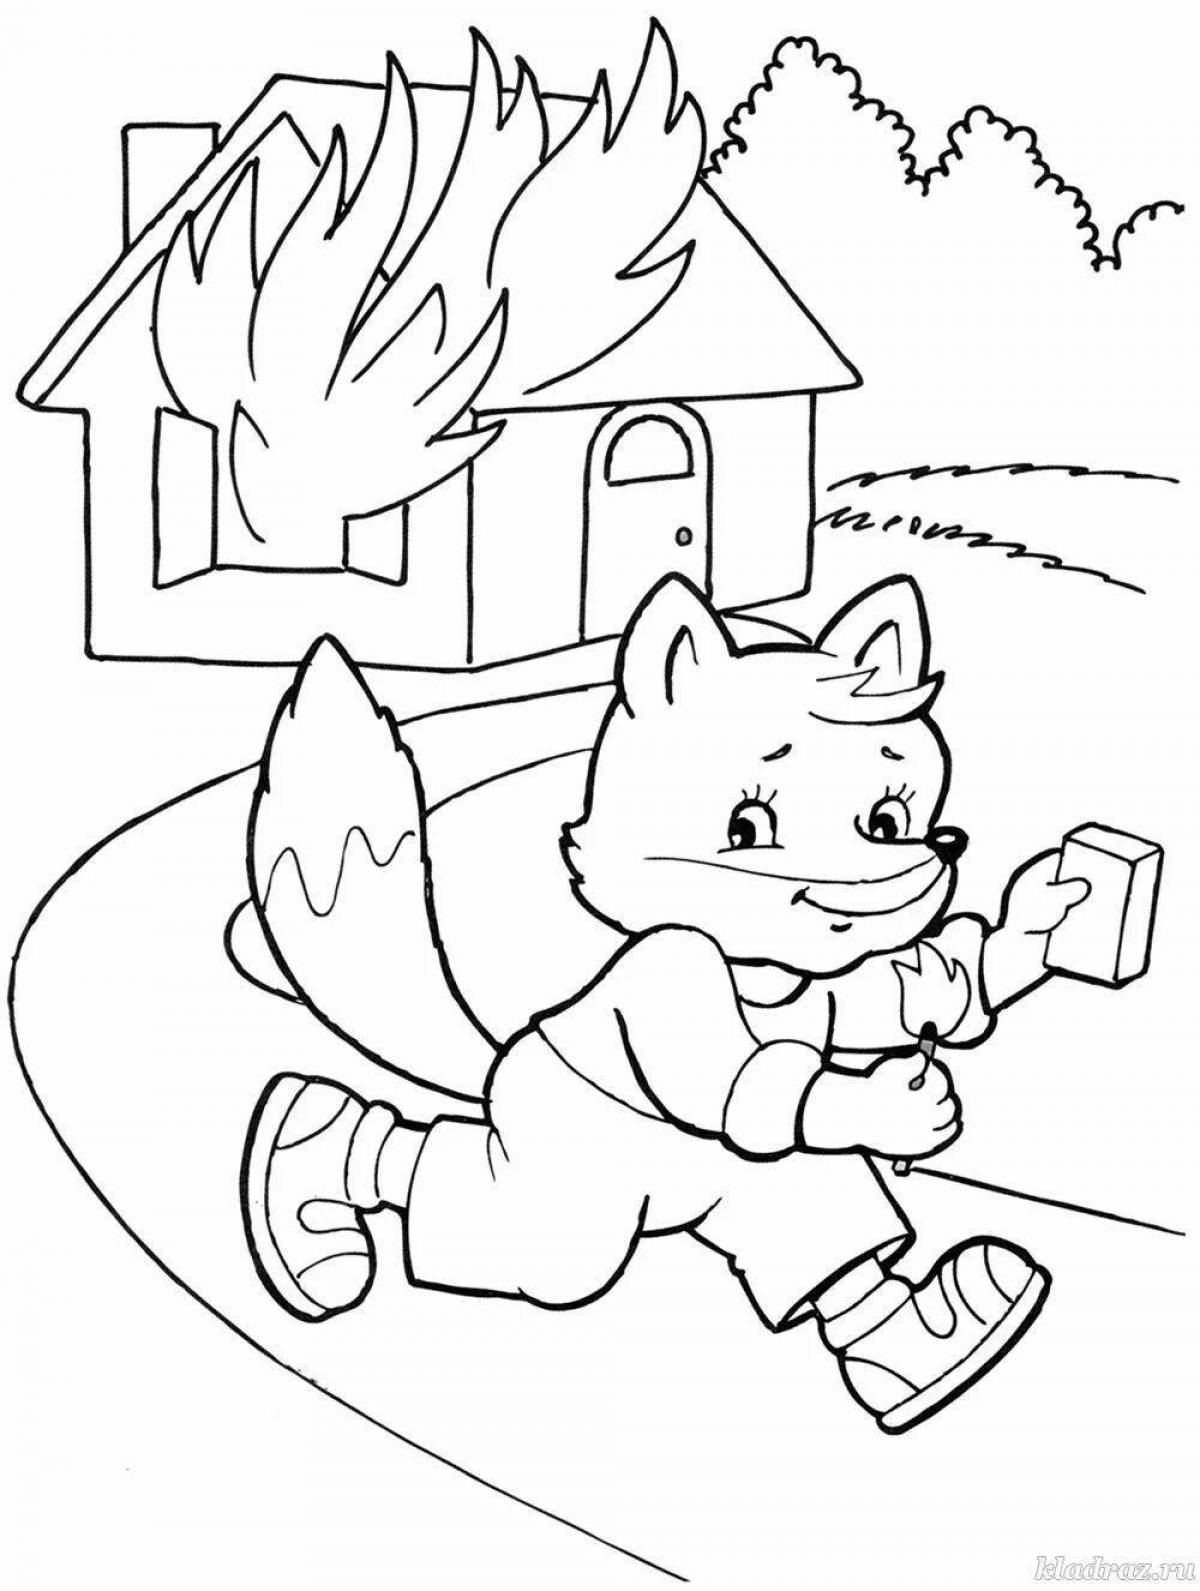 Fiery yellow fire coloring book for kids